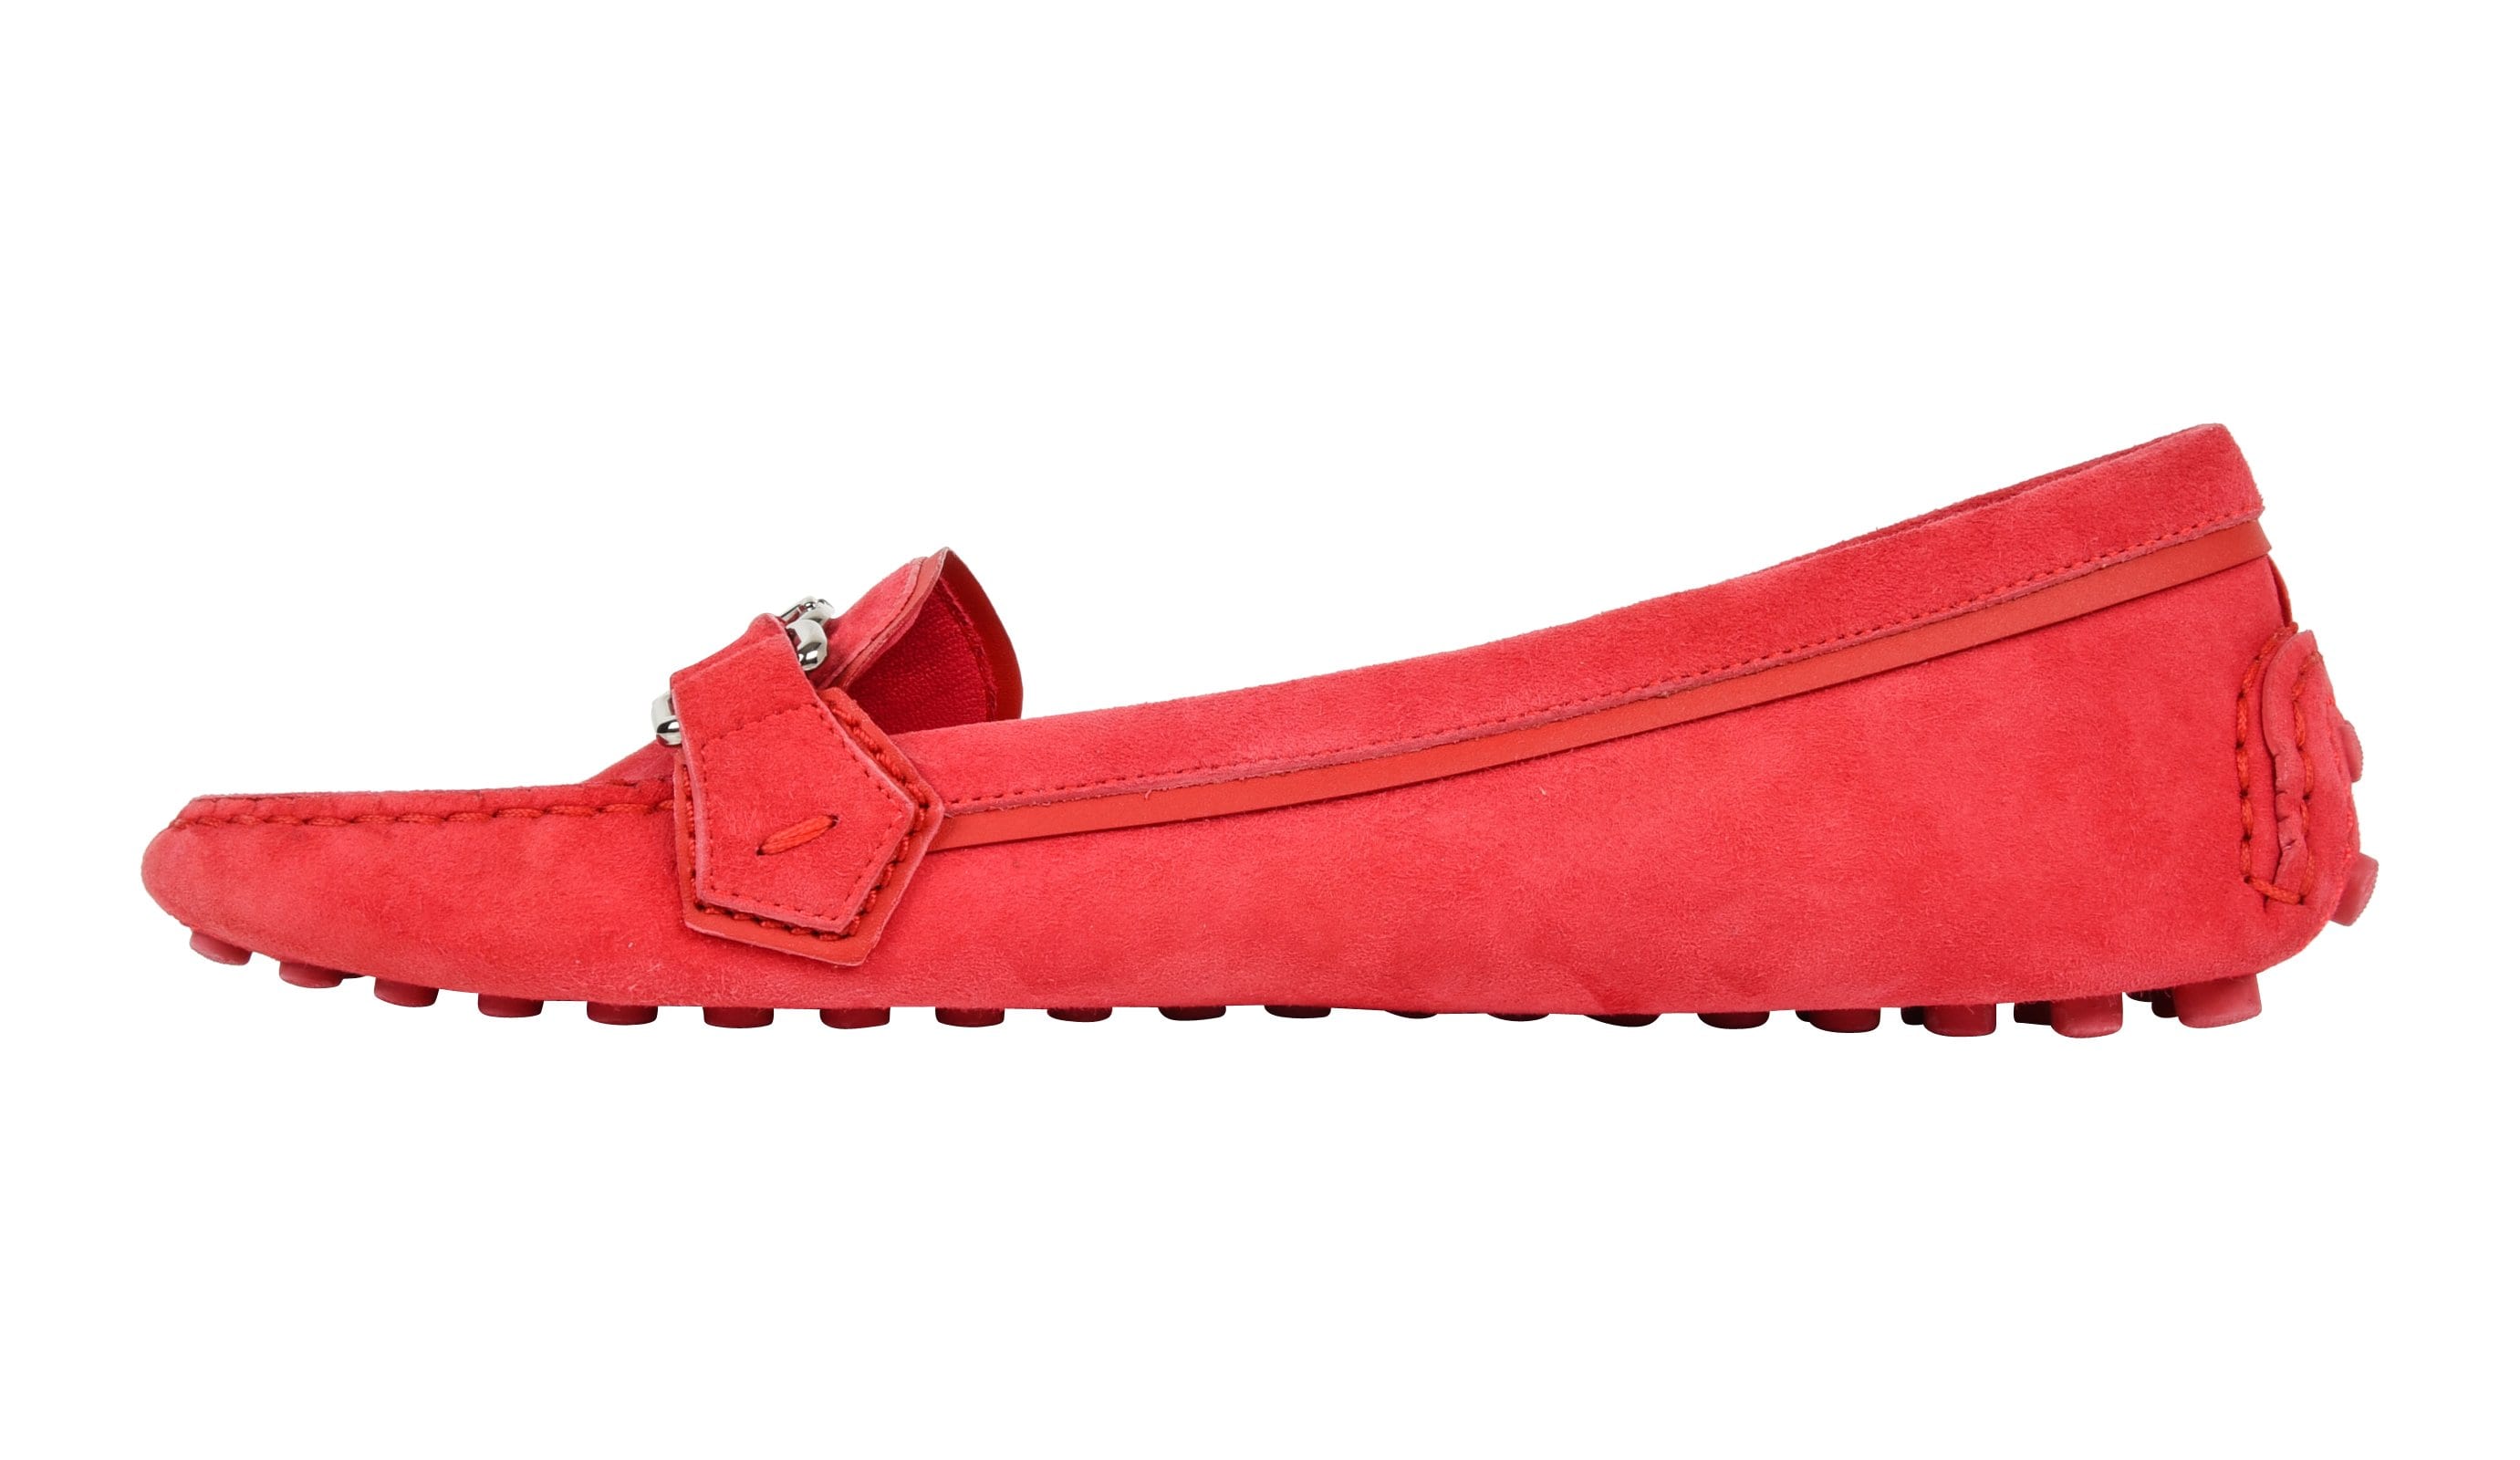 Louis Vuitton Shoe Pink Raspberry Suede Loafer / Driving Shoe 38.5 / 8 –  Mightychic